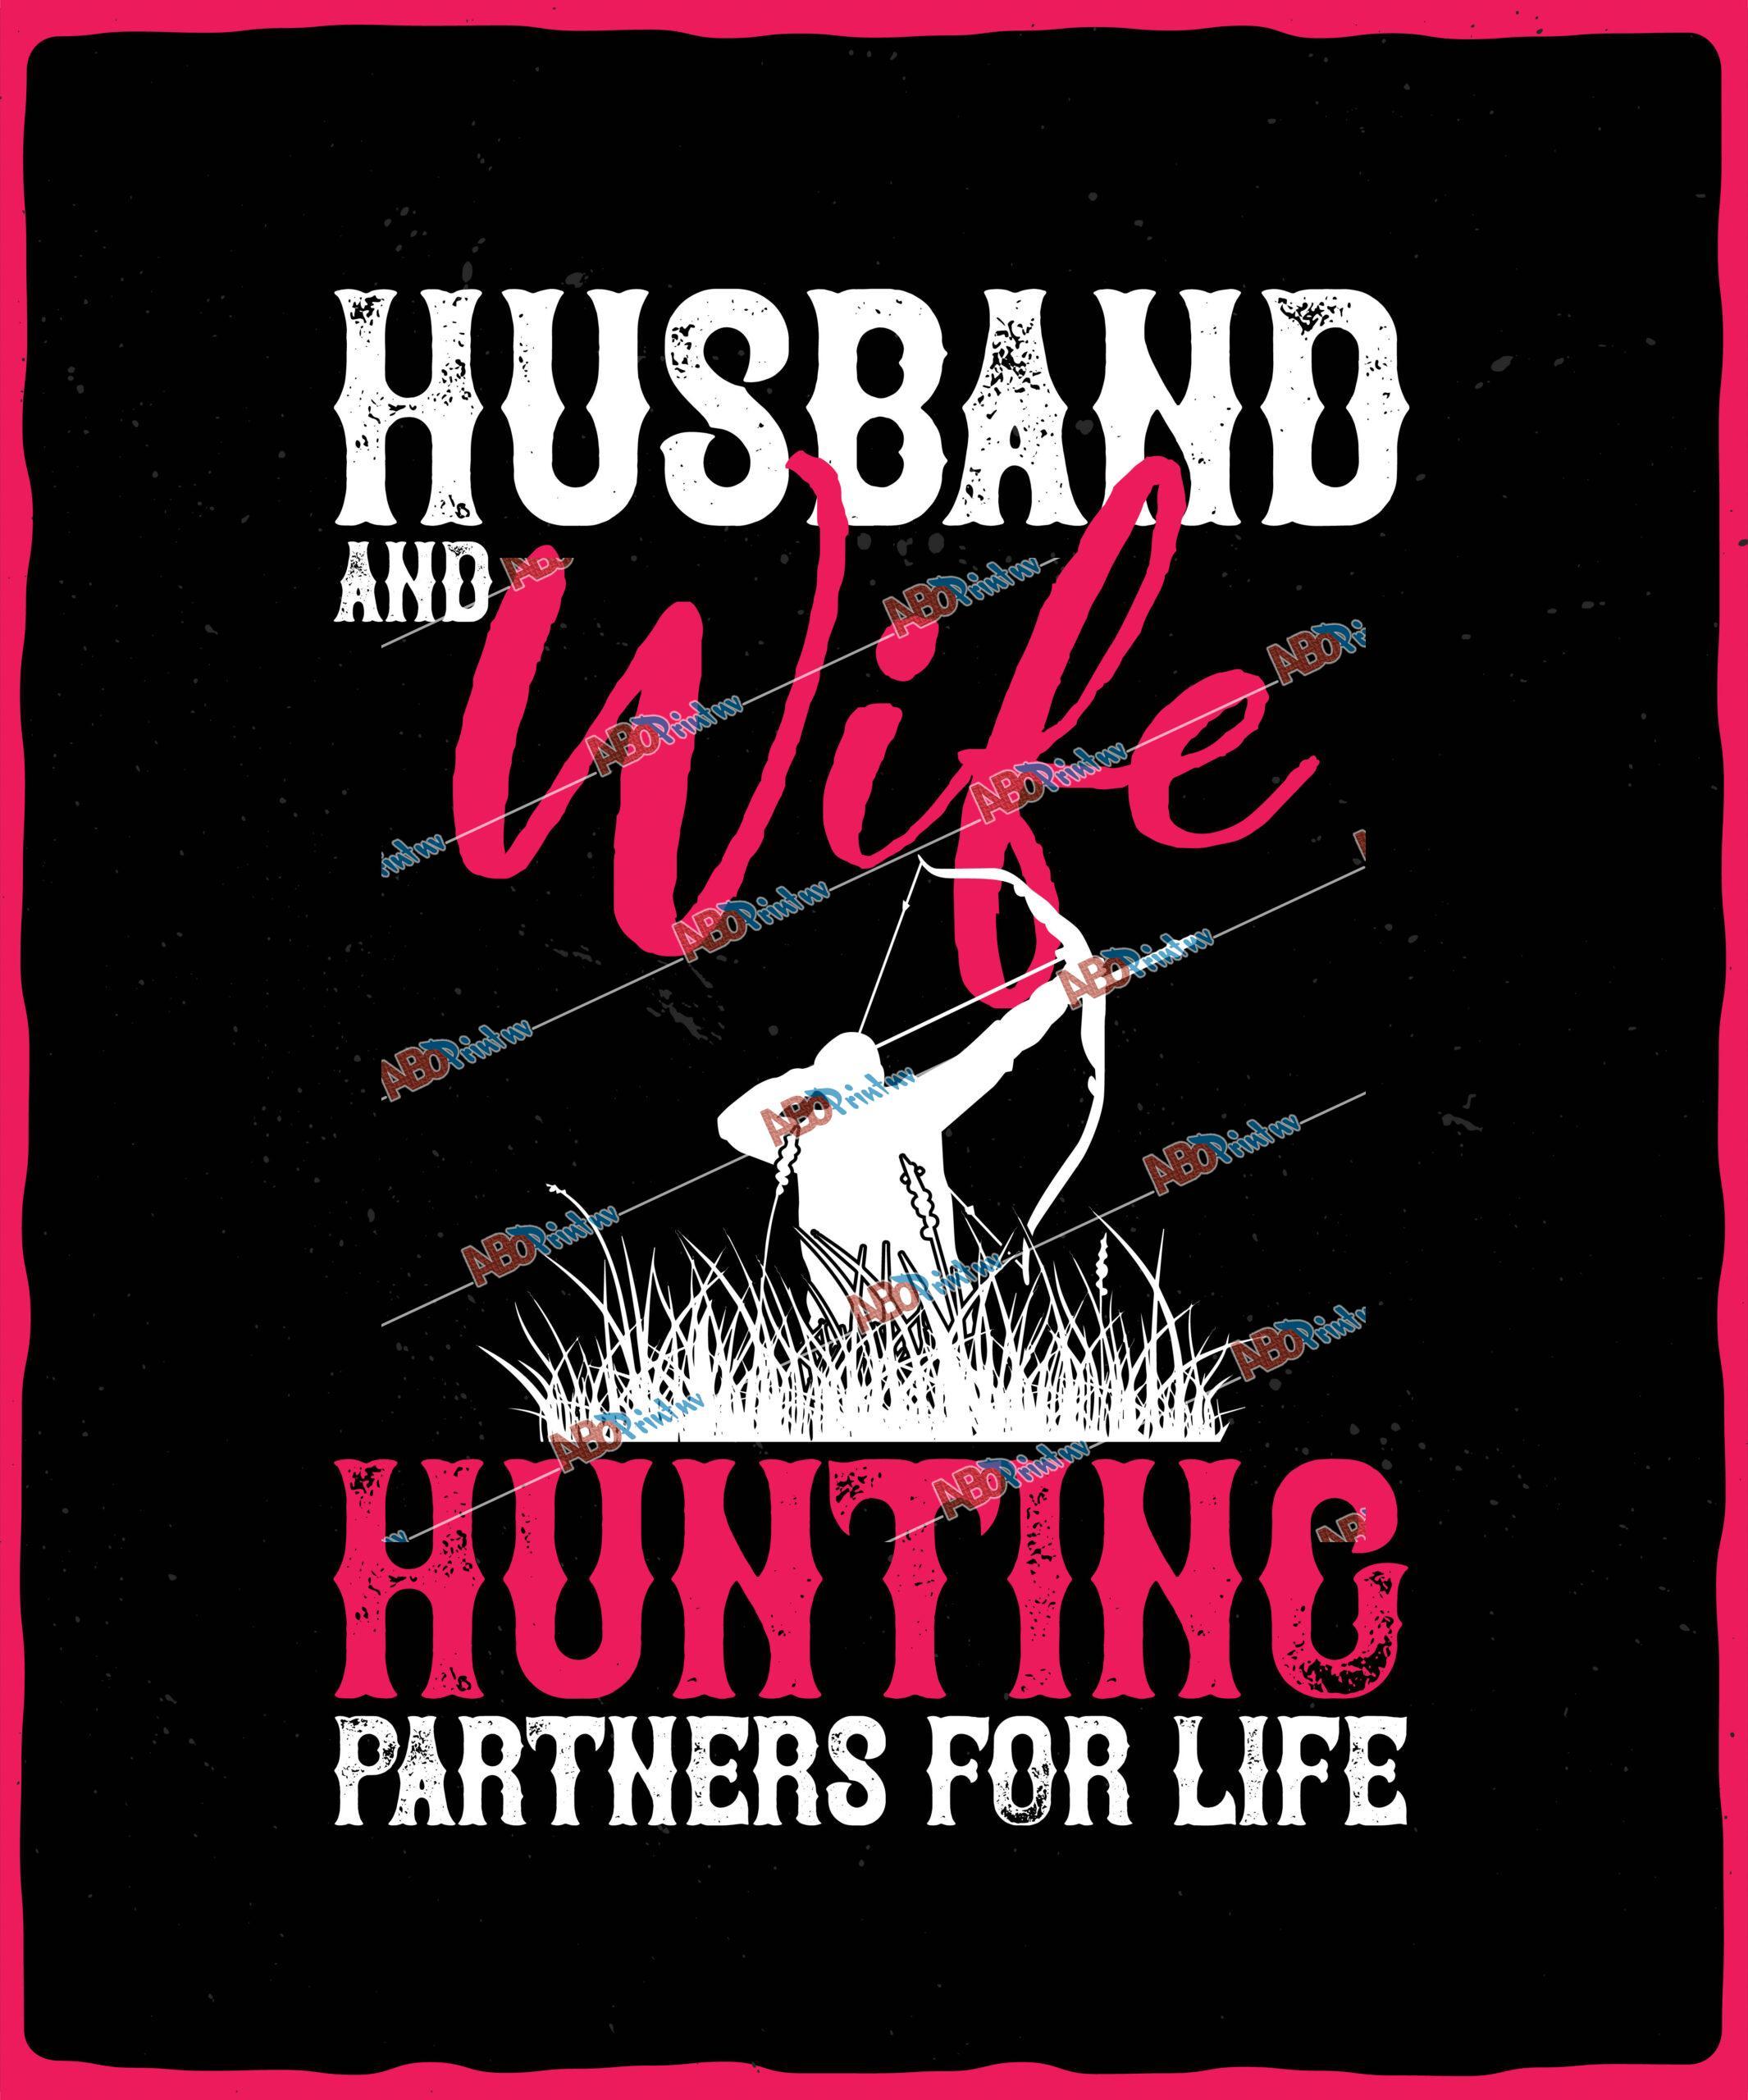 Husband and wife hunting partner